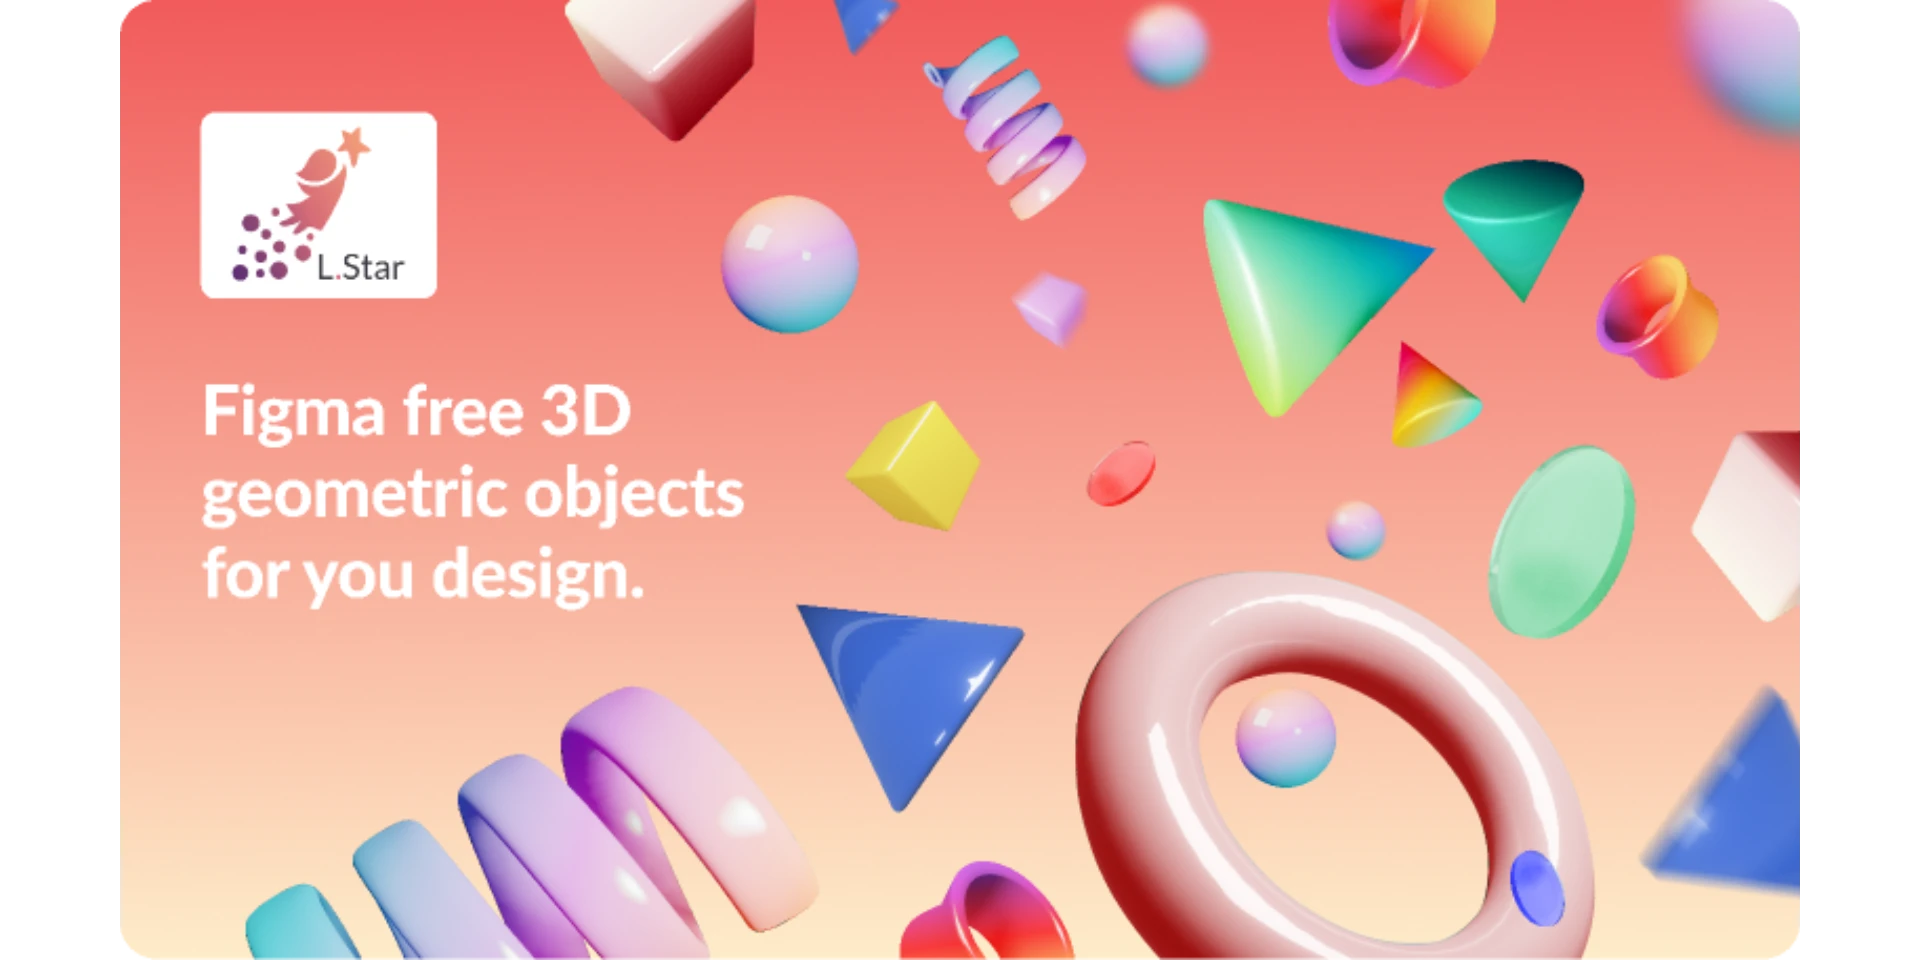 L.Star  free 3D geometric objects(Community) for Figma and Adobe XD